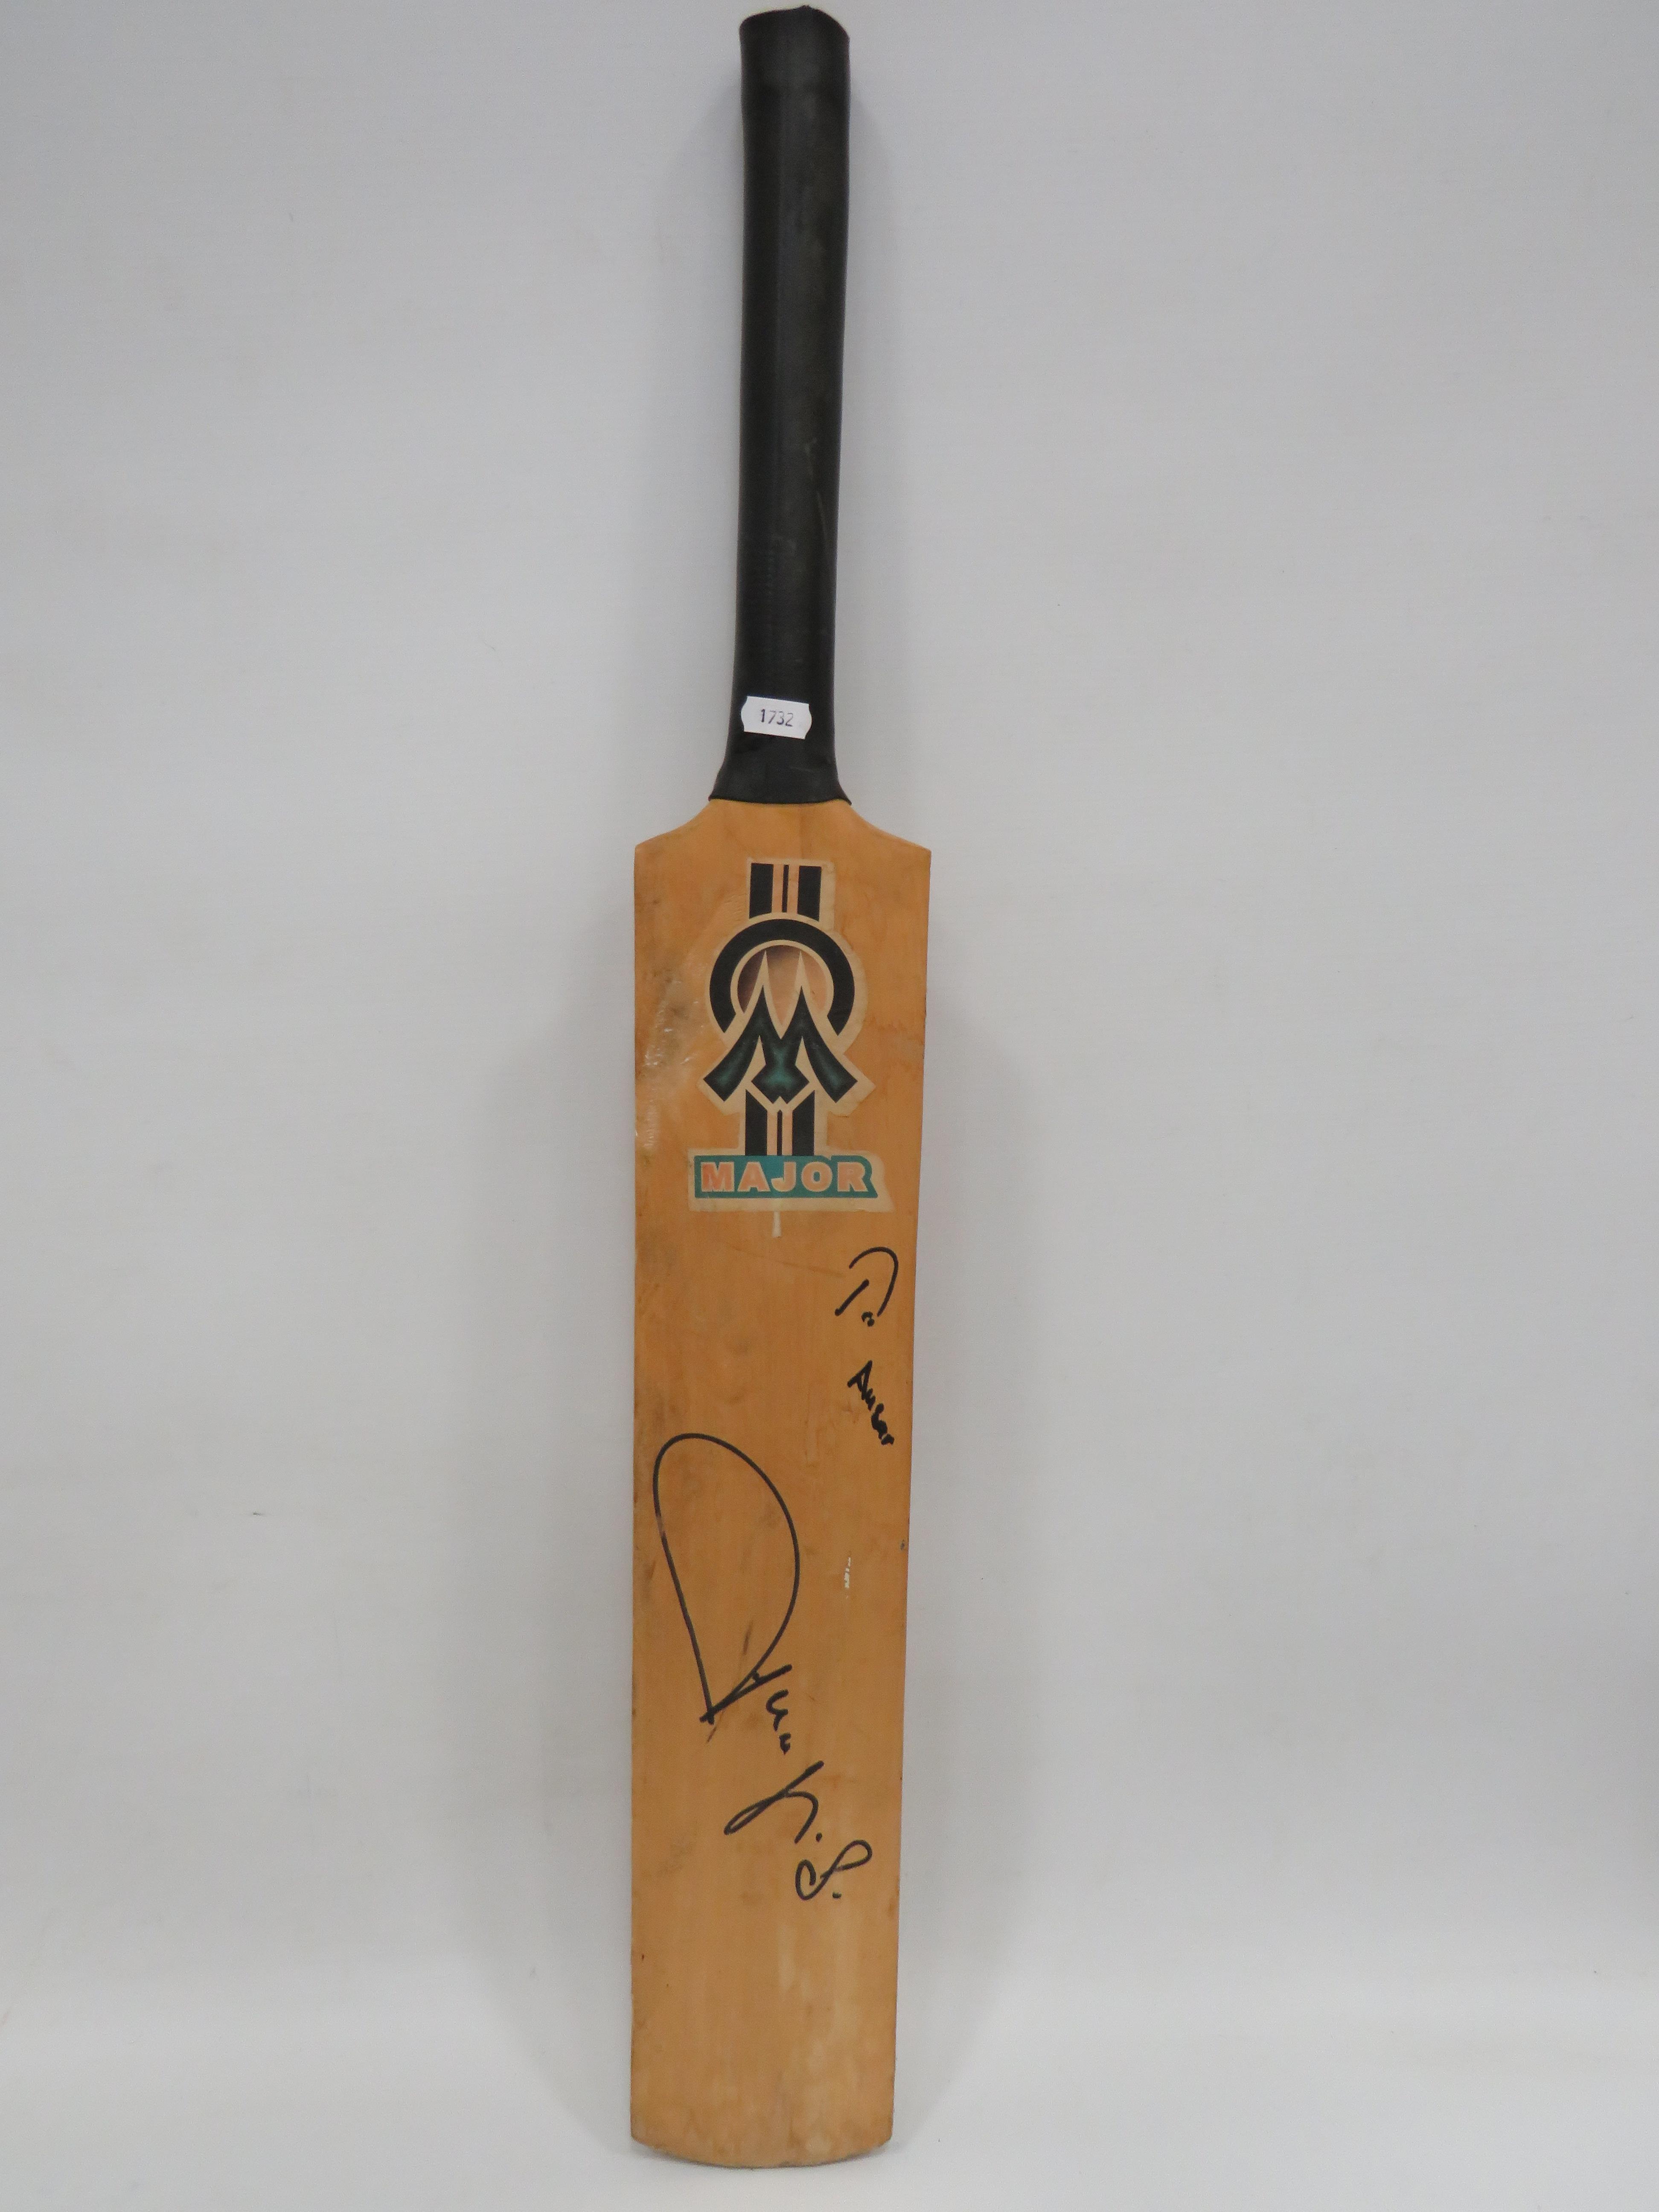 Childs Size Cricket bat by 'Major', 32 inches long. Indistinct signature to face. See photos